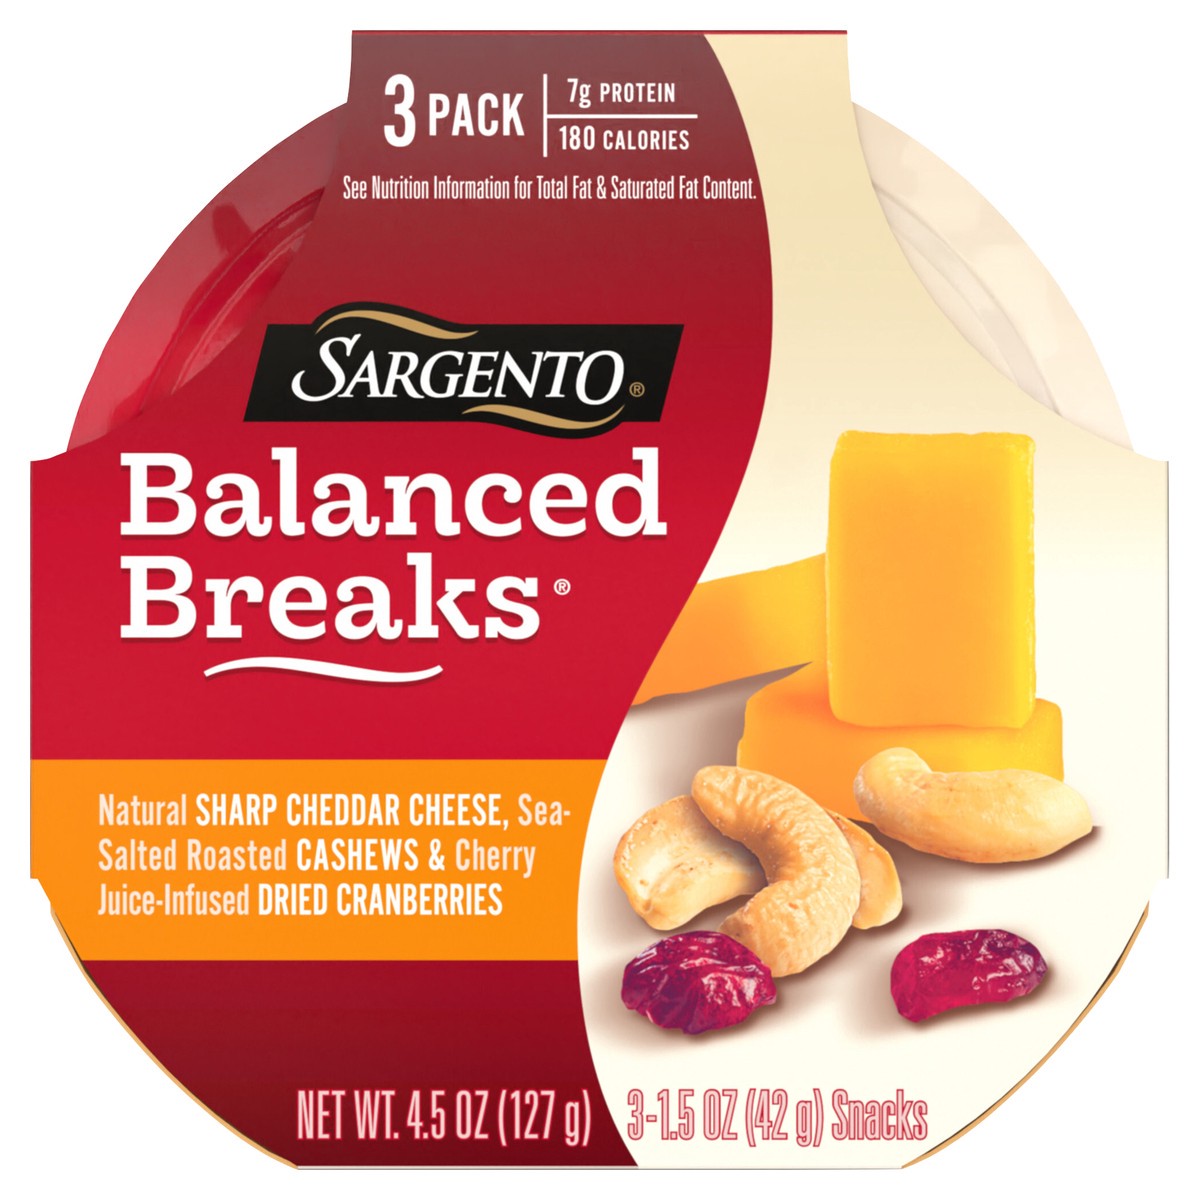 slide 1 of 34, Sargento Balanced Breaks Natural Sharp Cheddar Cheese, Sea-Salted Cashews and Cherry Juice-Infused Dried Cranberries, 3-Pack, 3 ct